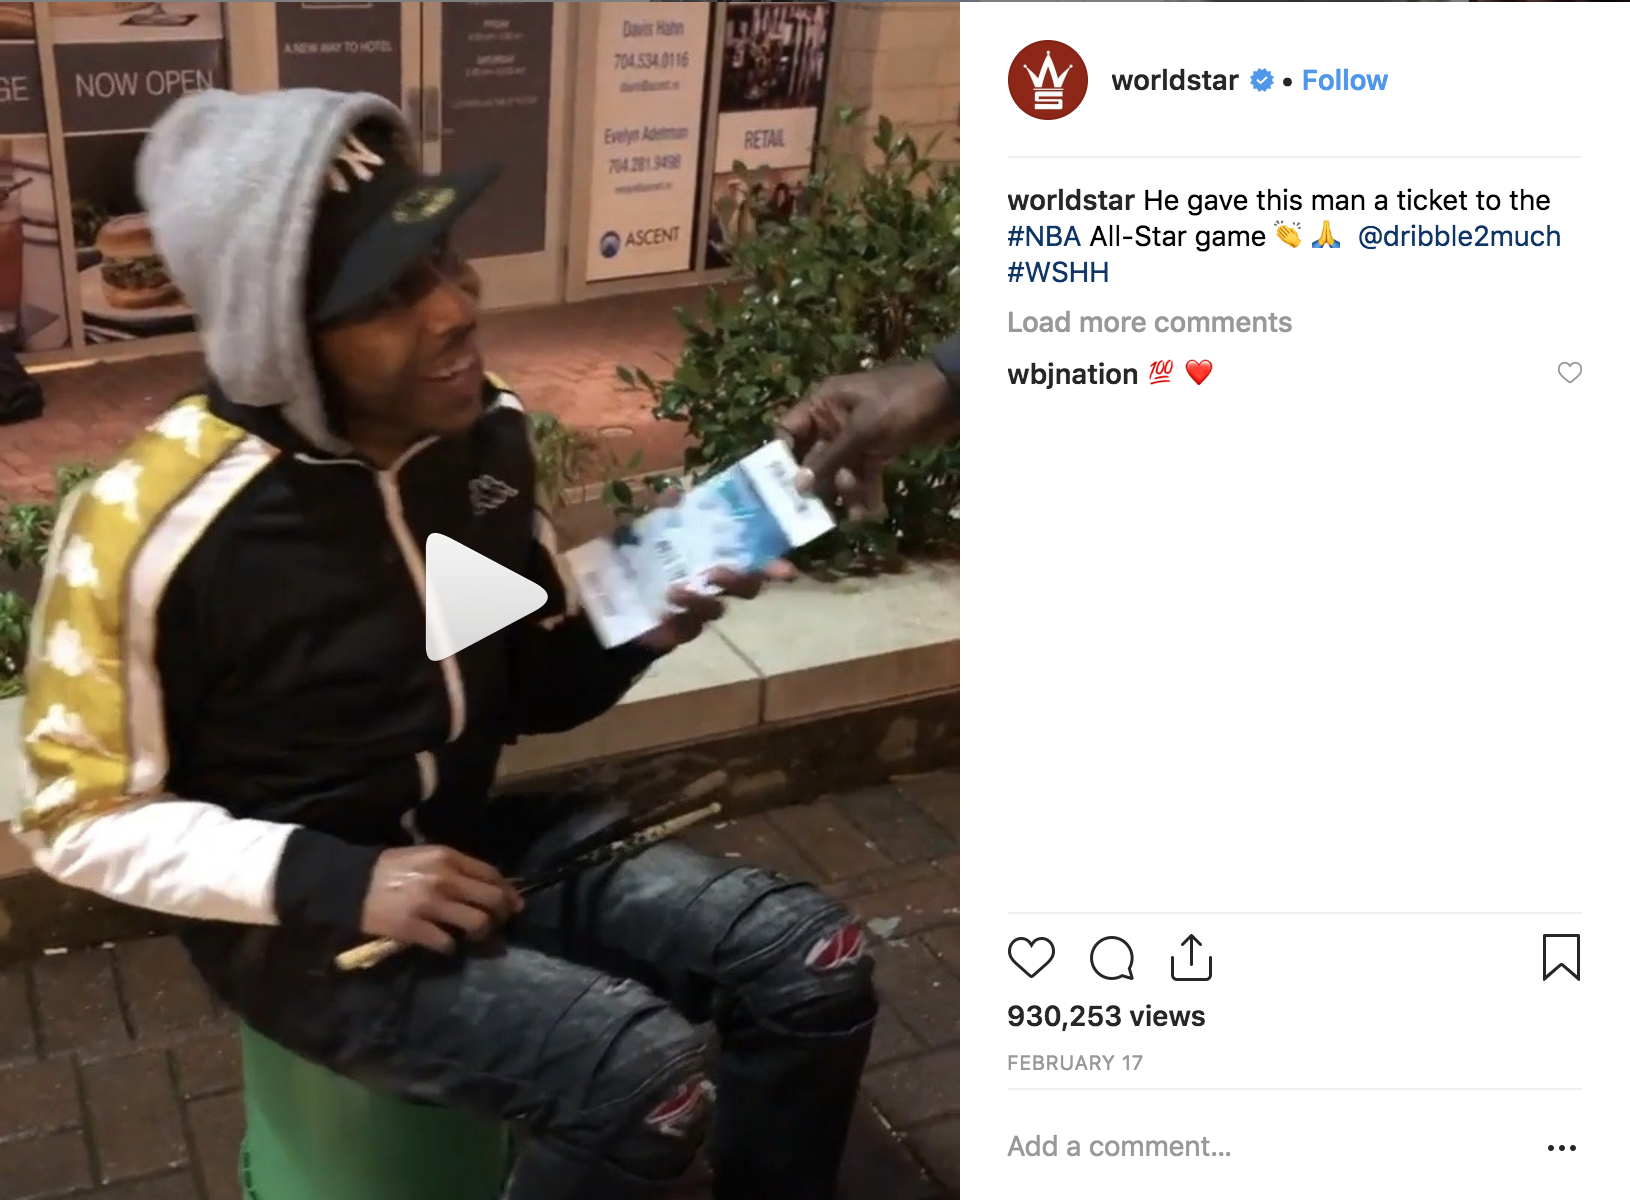 Ticket Giveaway Repost by WorldStar